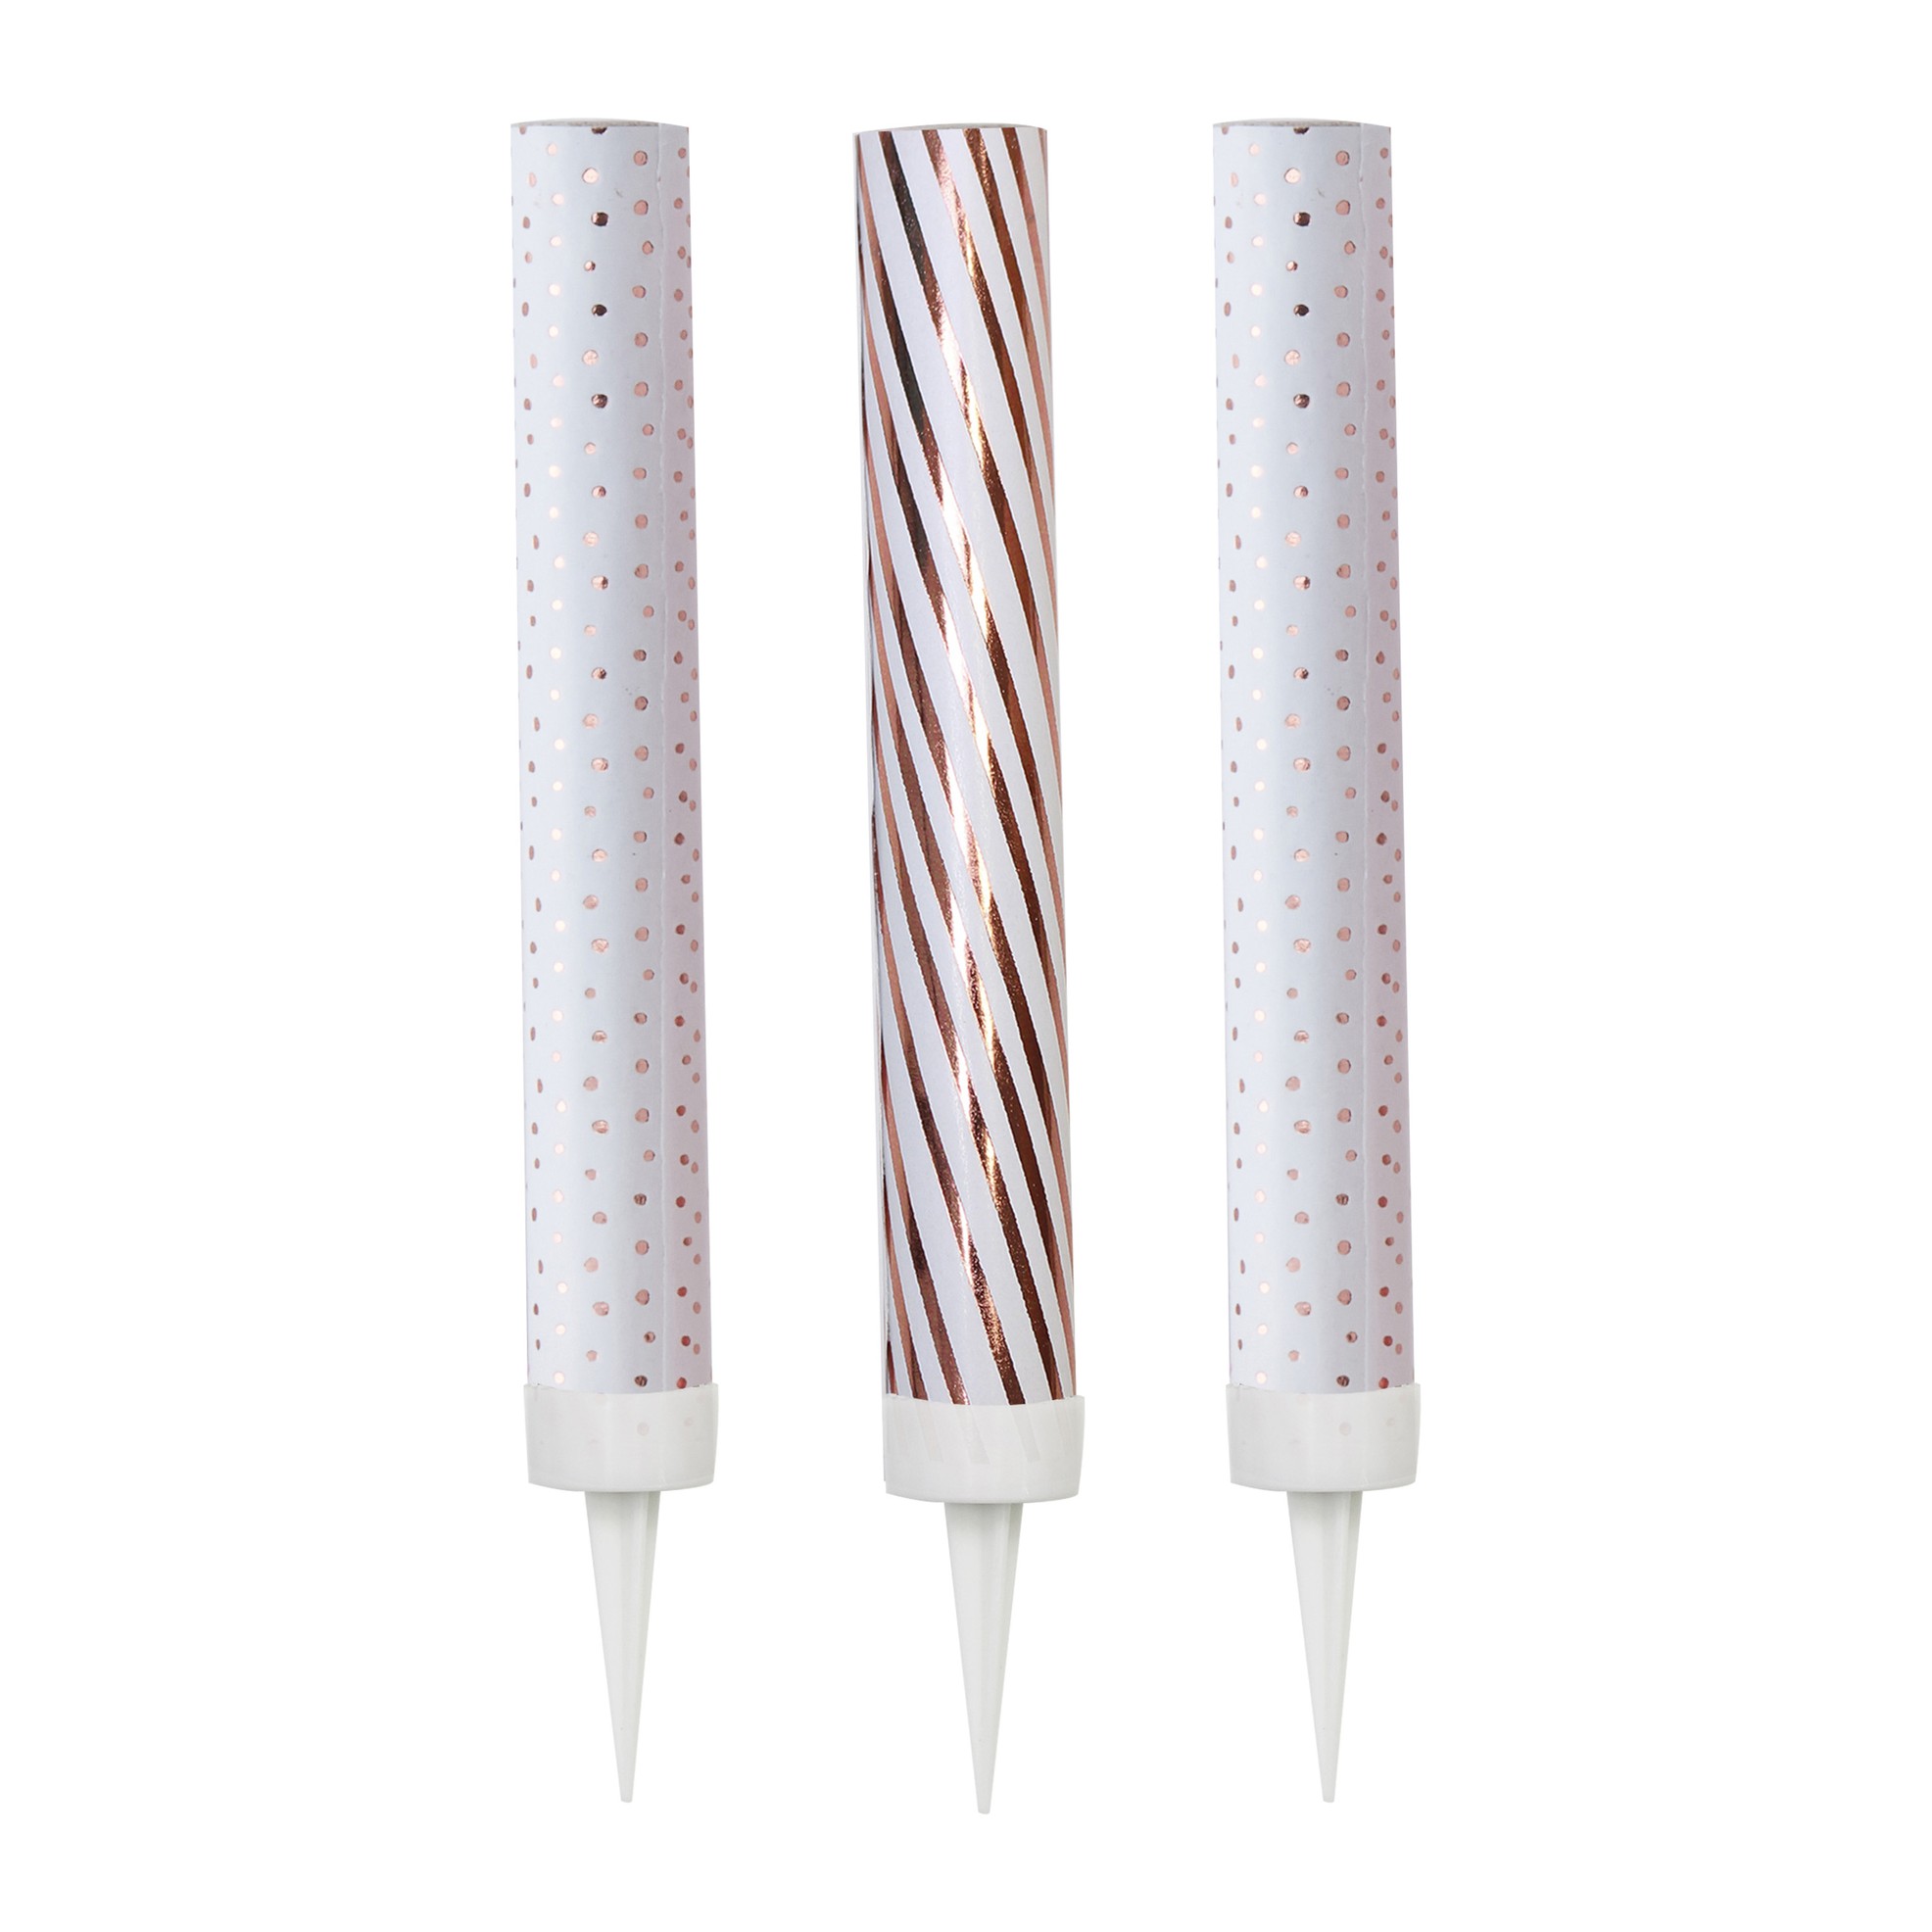 Ginger Ray Rose Gold Cake Fountain Candles : Pack of 3